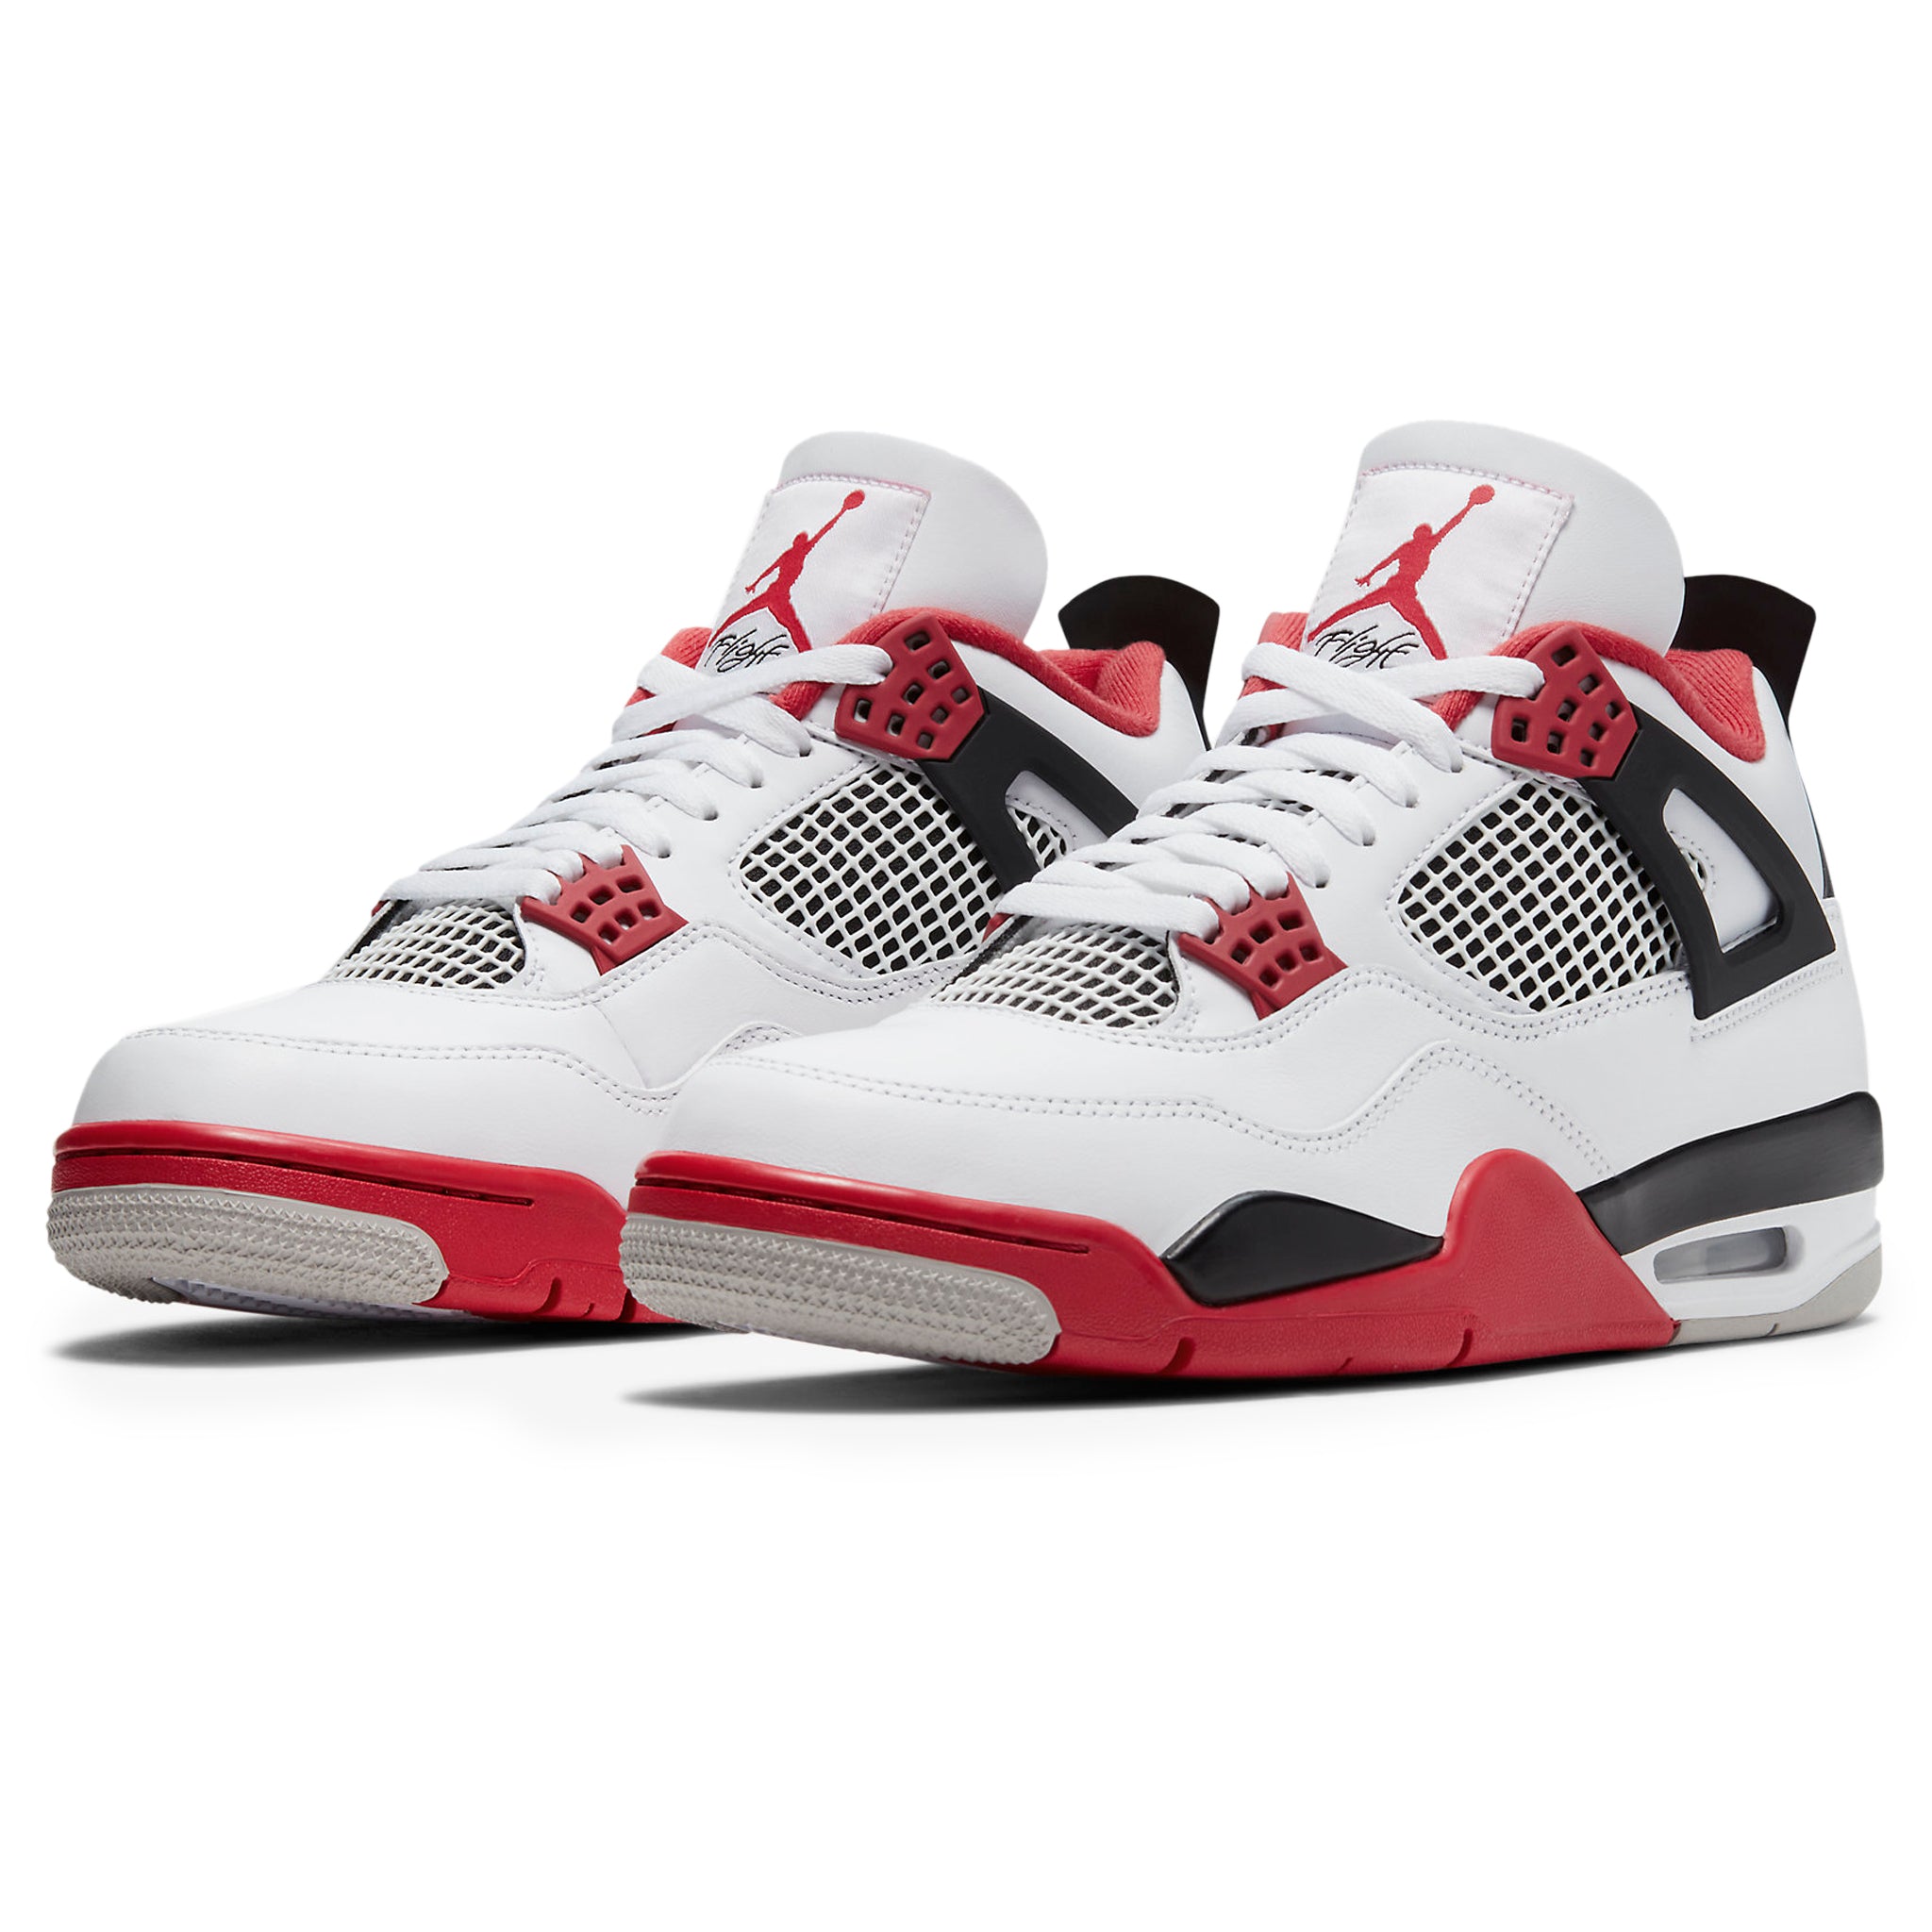 Front side view of Air Jordan 4 Retro Fire Red 2020 DC7770-160